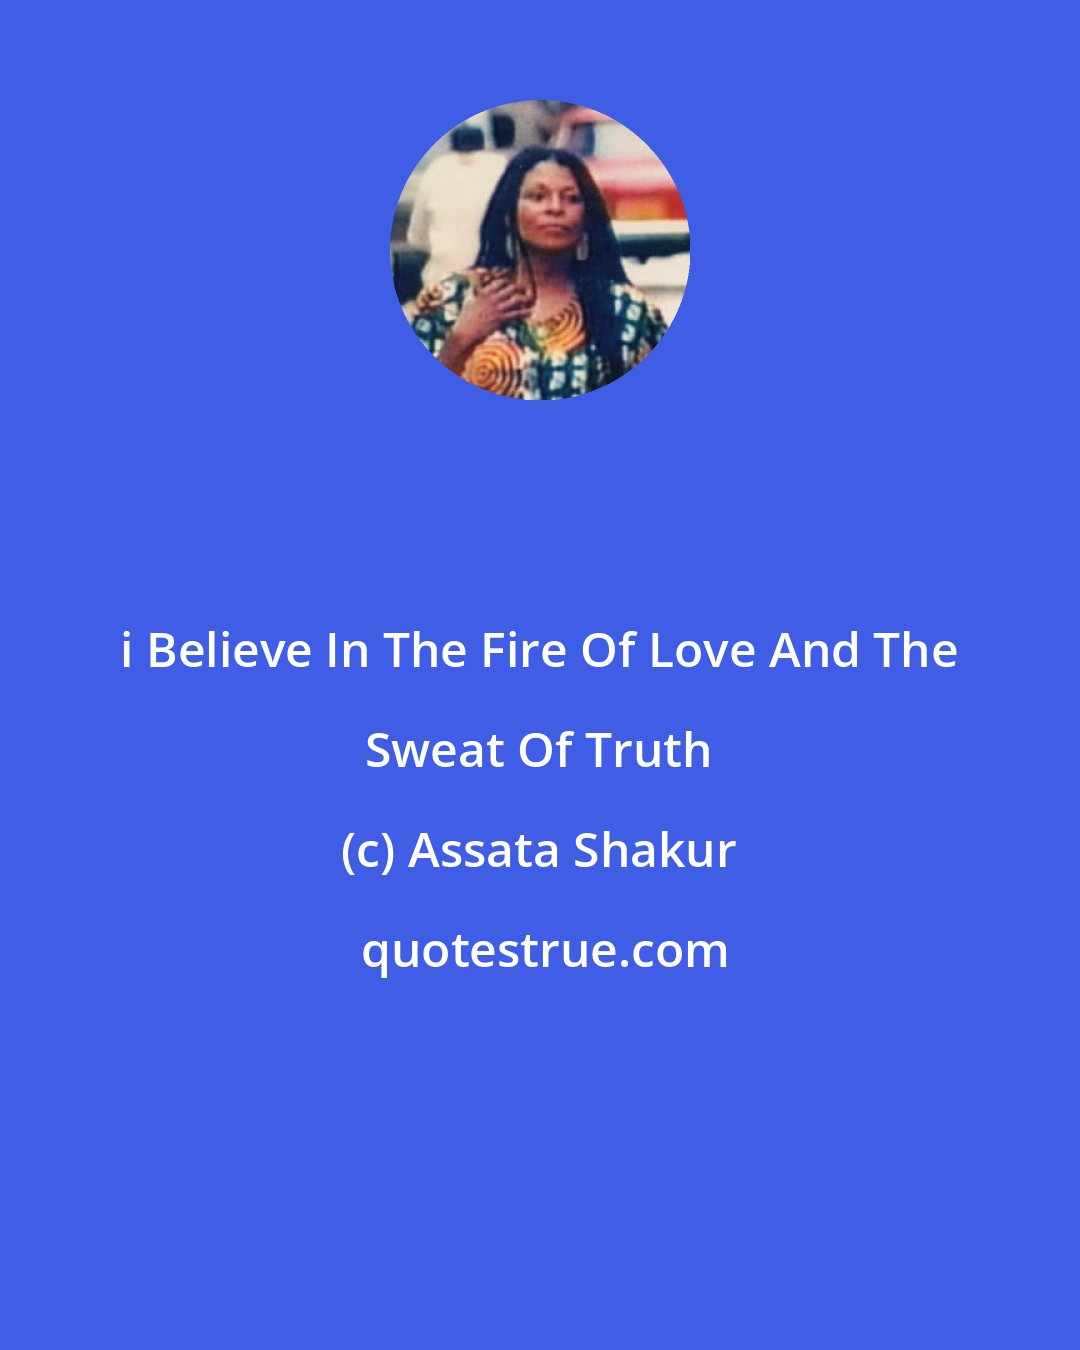 Assata Shakur: i Believe In The Fire Of Love And The Sweat Of Truth